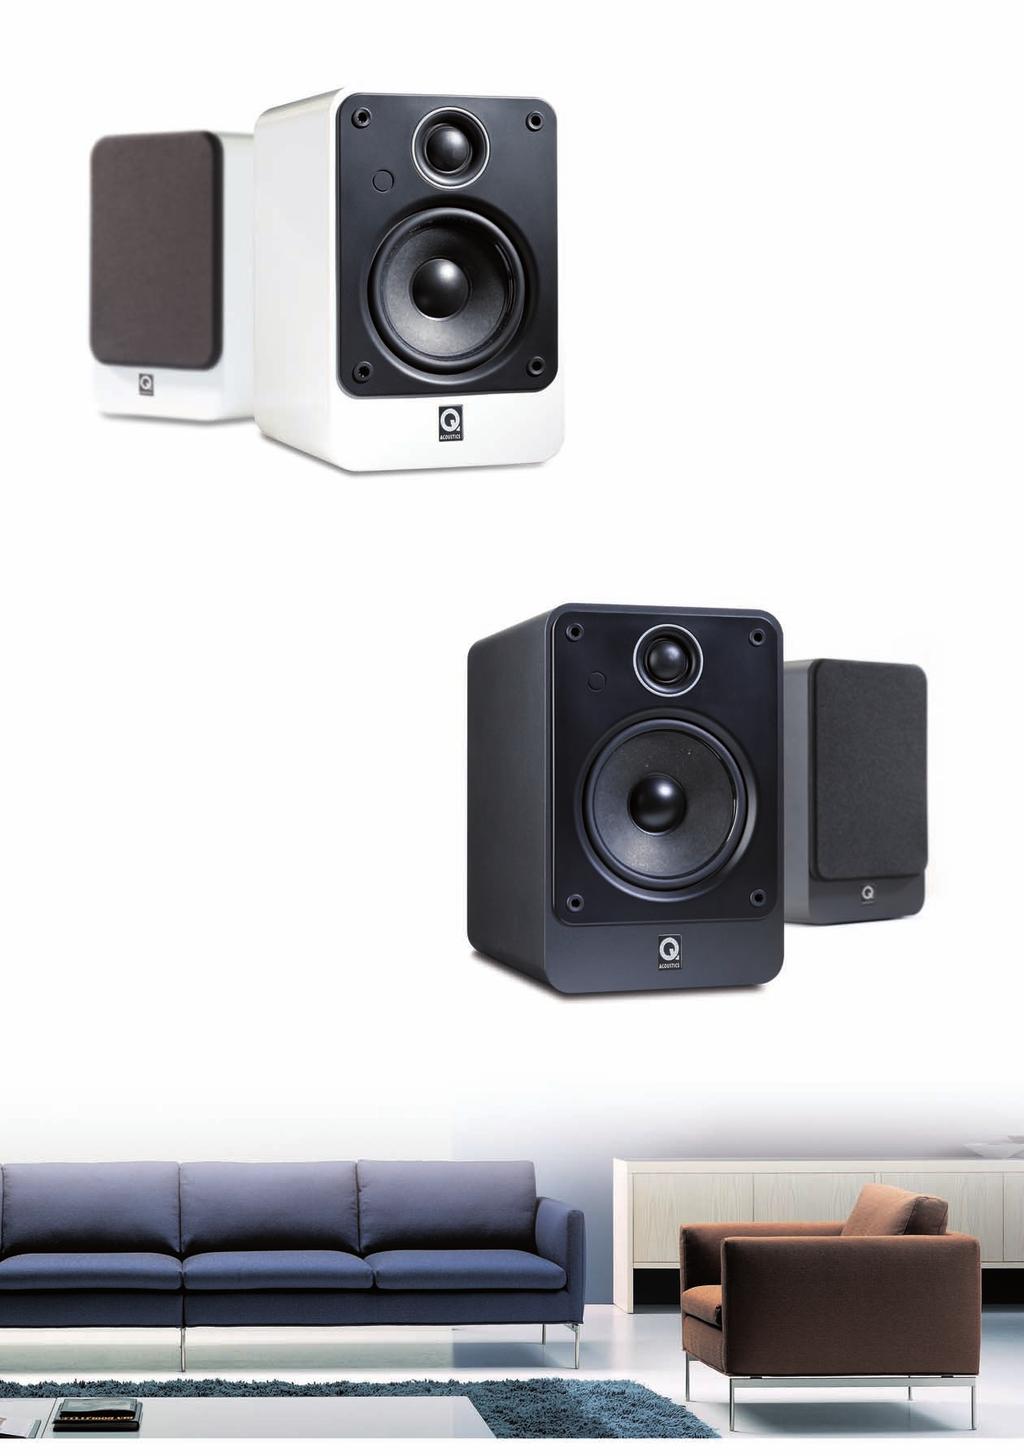 2010 Compact Bookshelf Wallmount Speaker This award winning ultra compact bookshelf speaker sets new standards for sonic performance in its class.